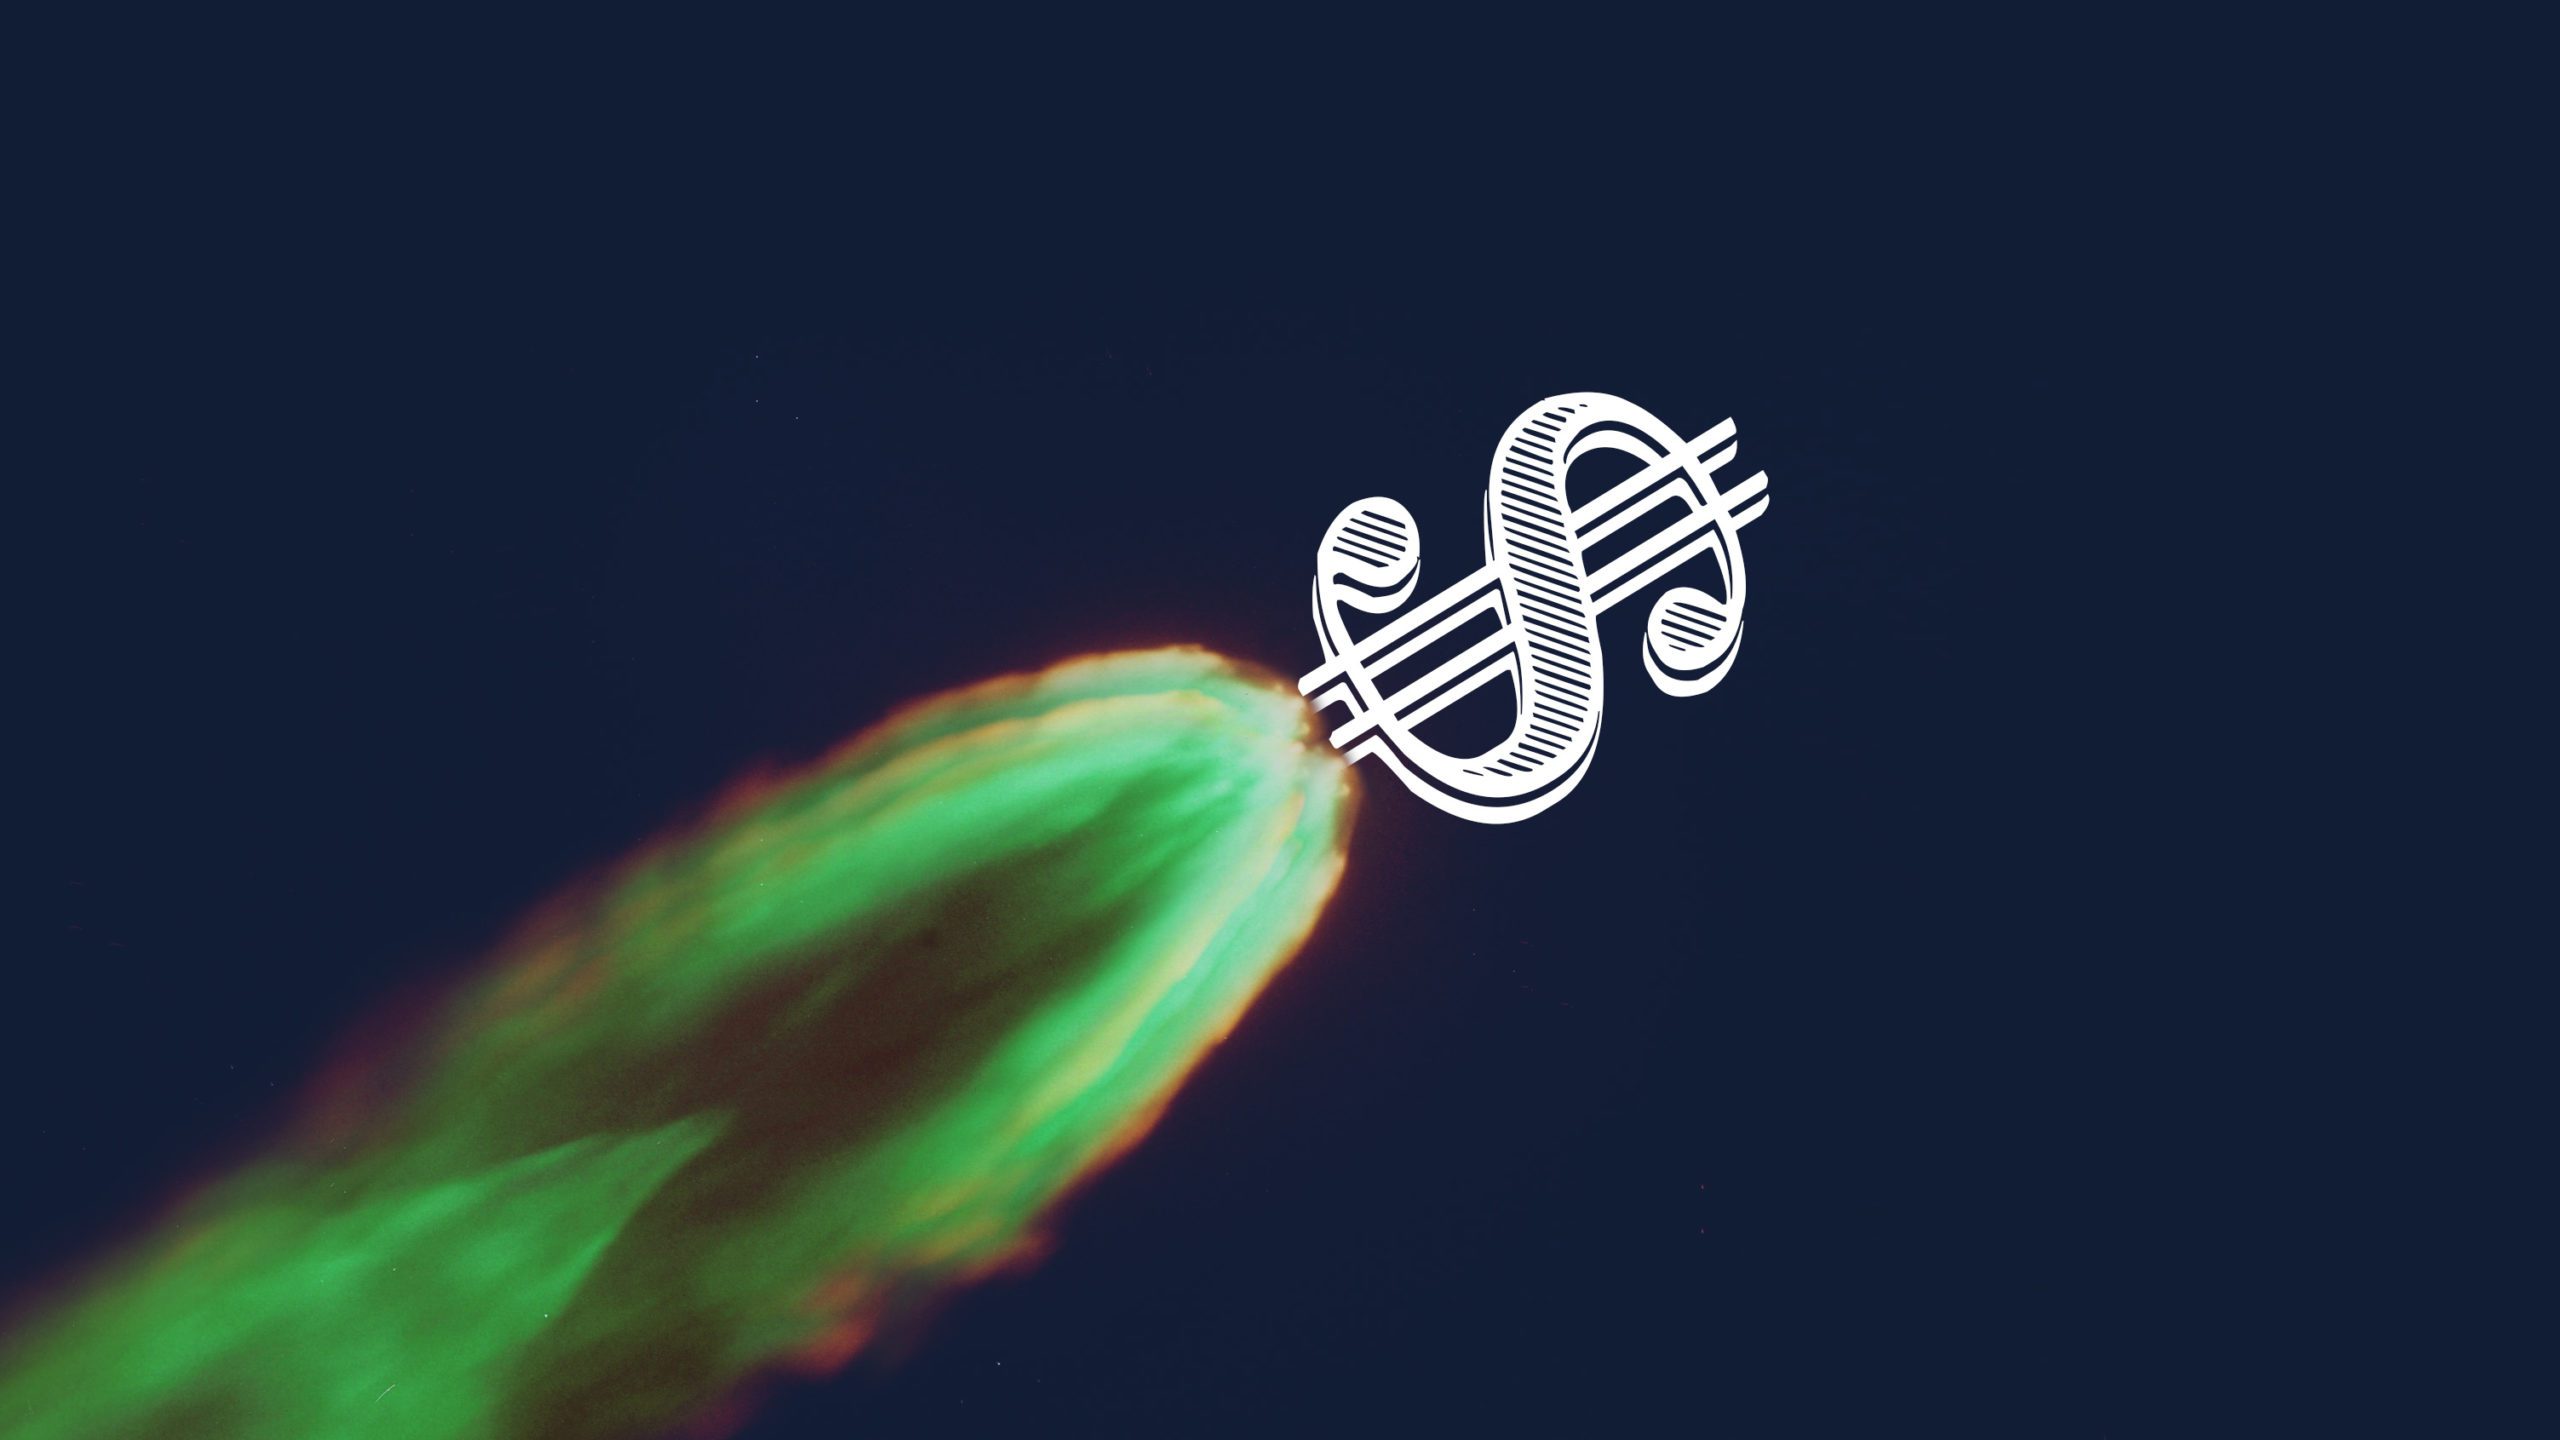 stock image of the Apollo 7 rocket in flight, but the rocket is replaced by a dollar sign and the flames are green because money